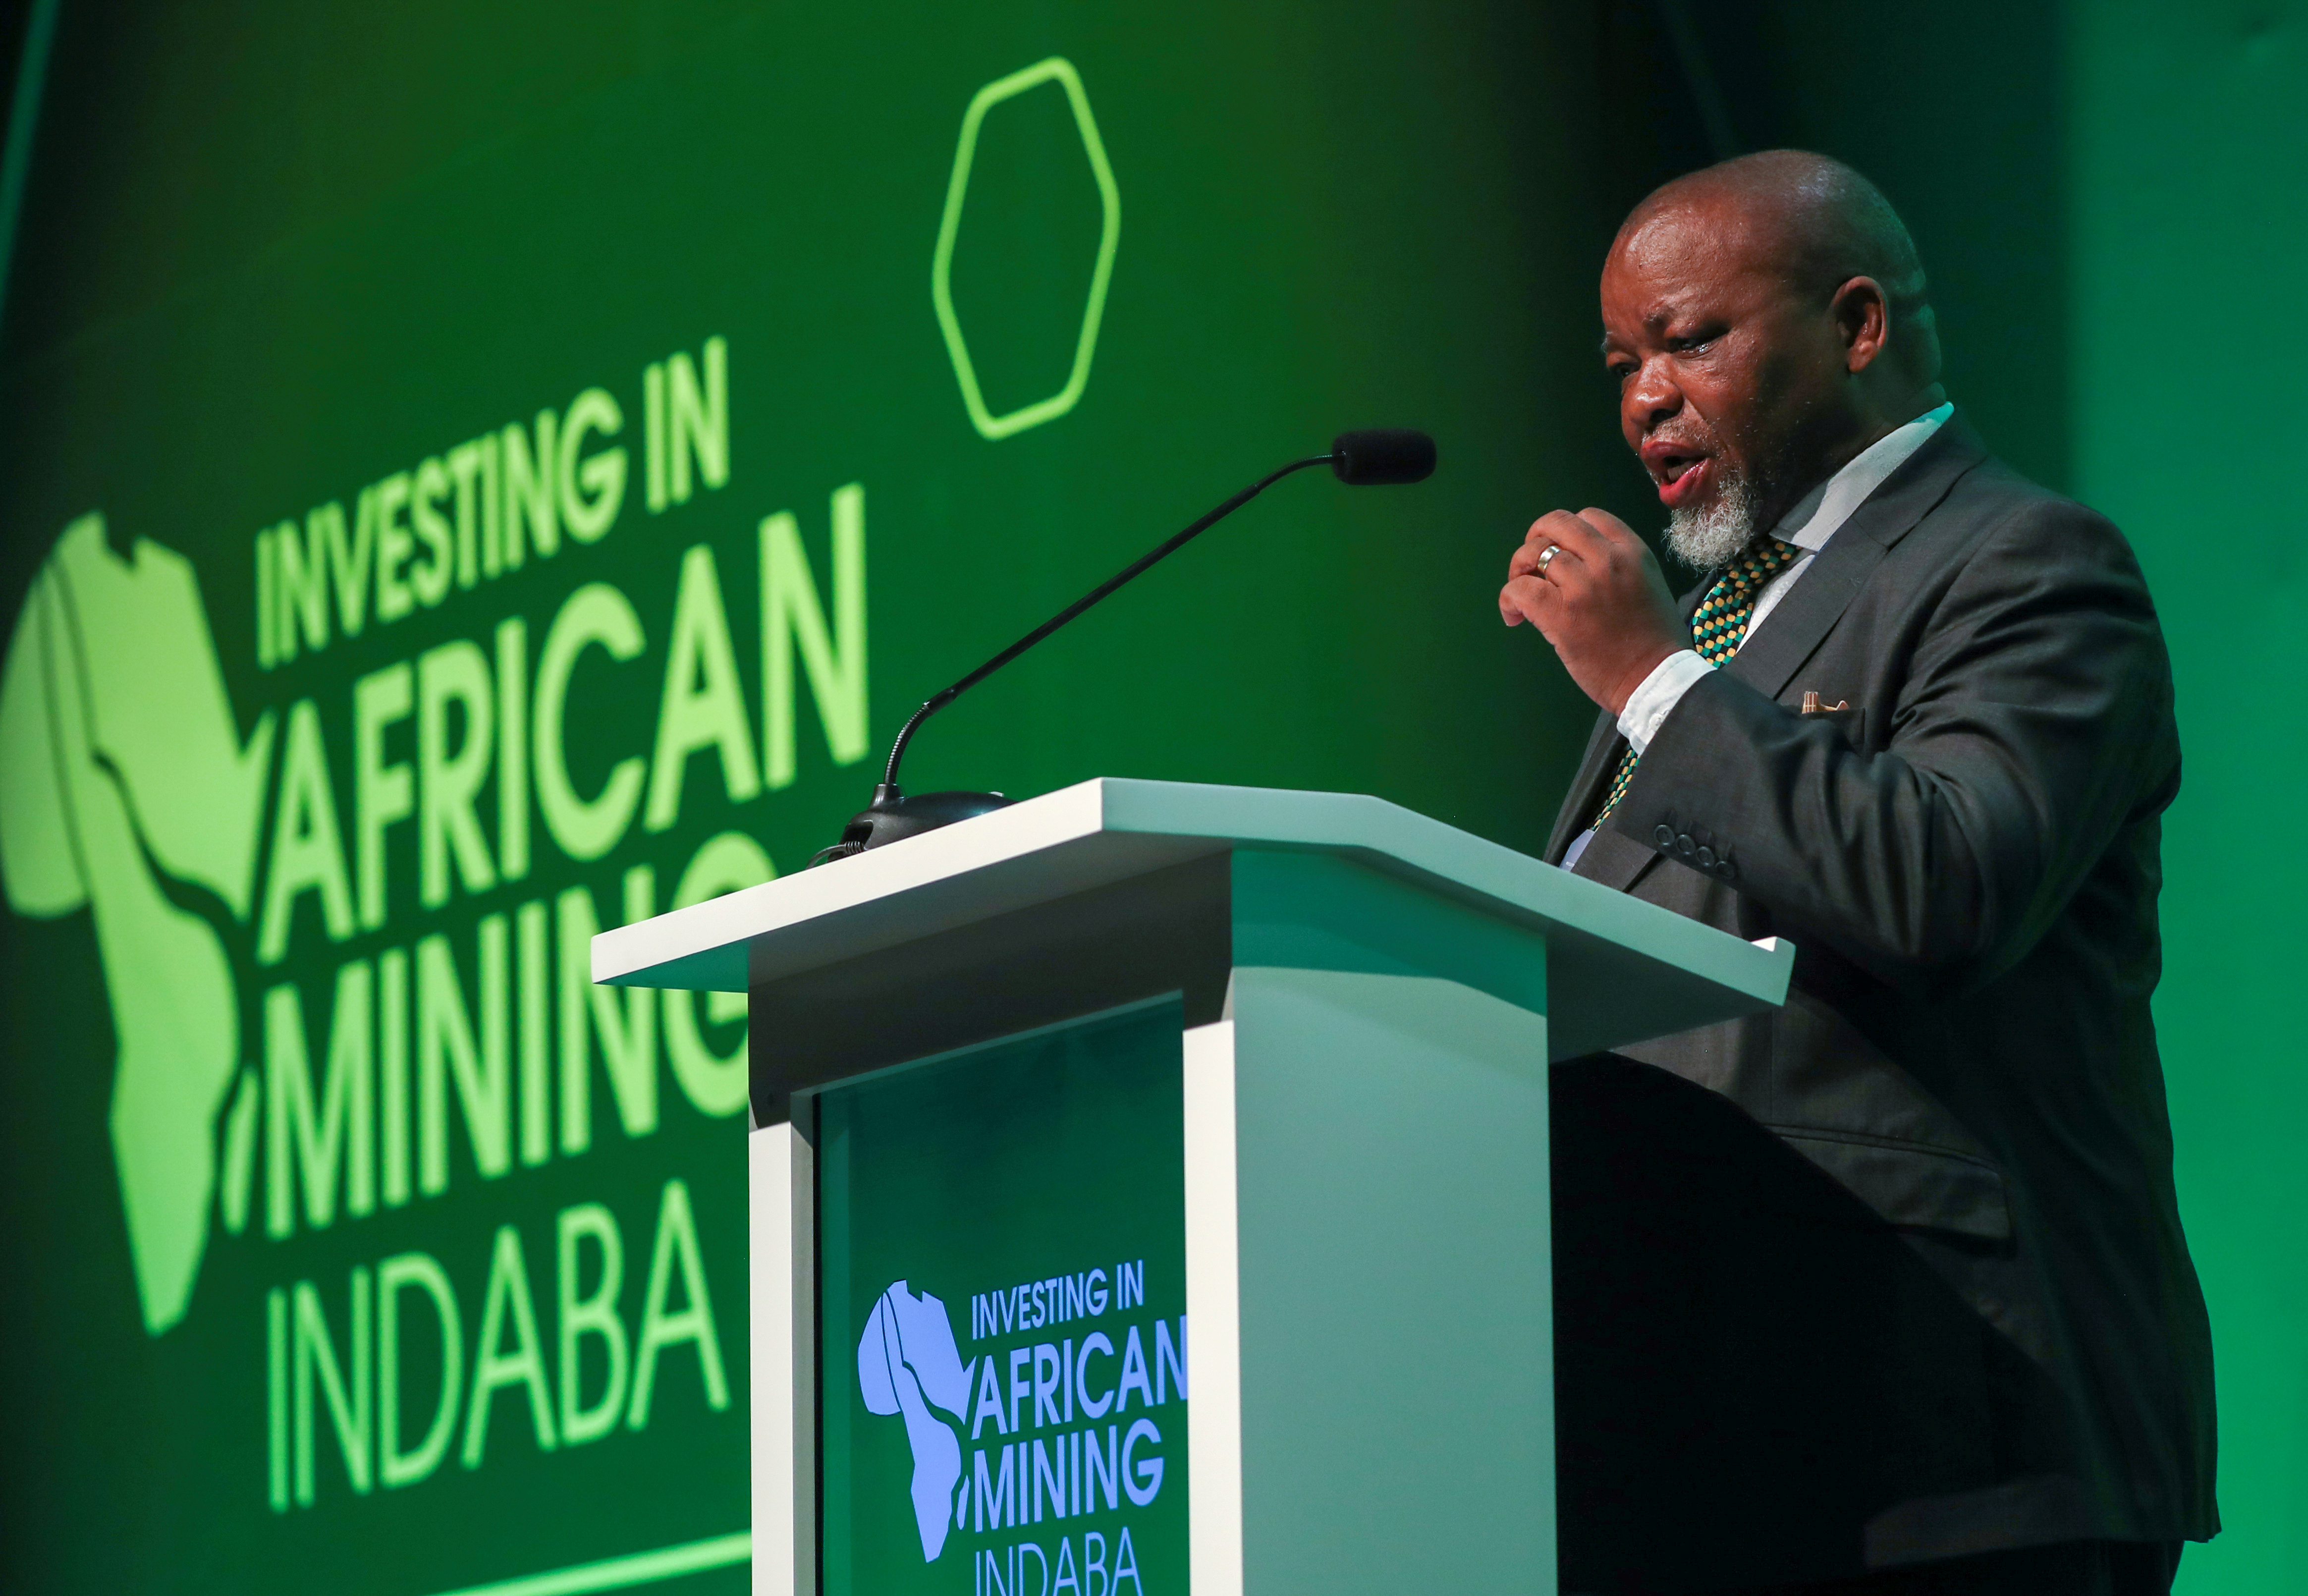 South African Minister of Mineral Resources Gwede Mantashe speaks at the 2020 Investing in African Mining Indaba conference in Cape Town